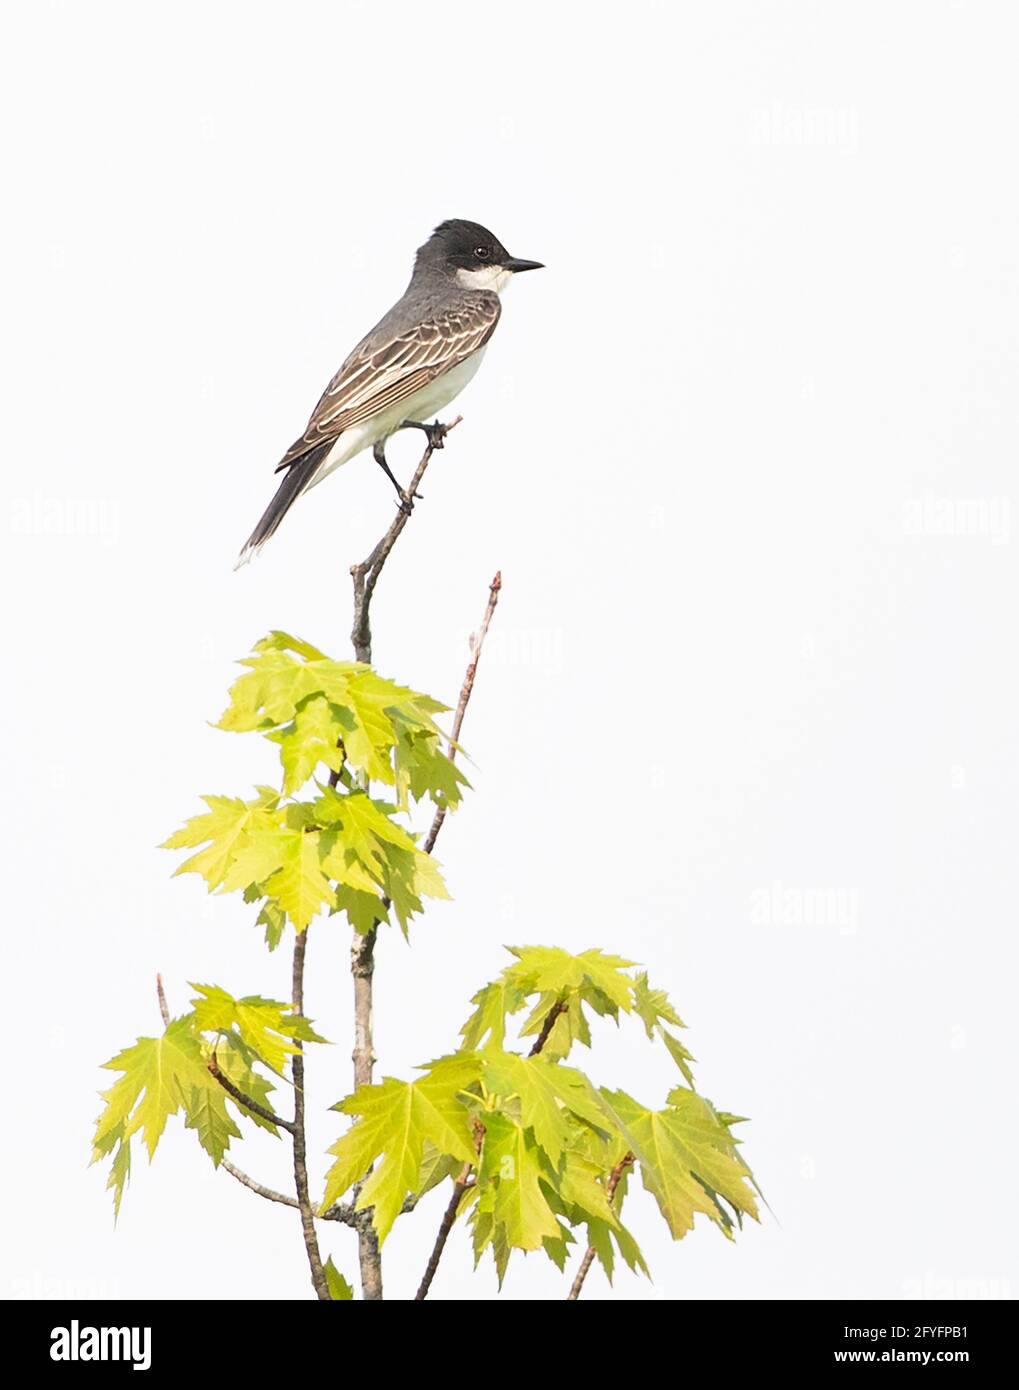 Eastern kingbird perched on a tree branch in Ottawa, Canada Stock Photo